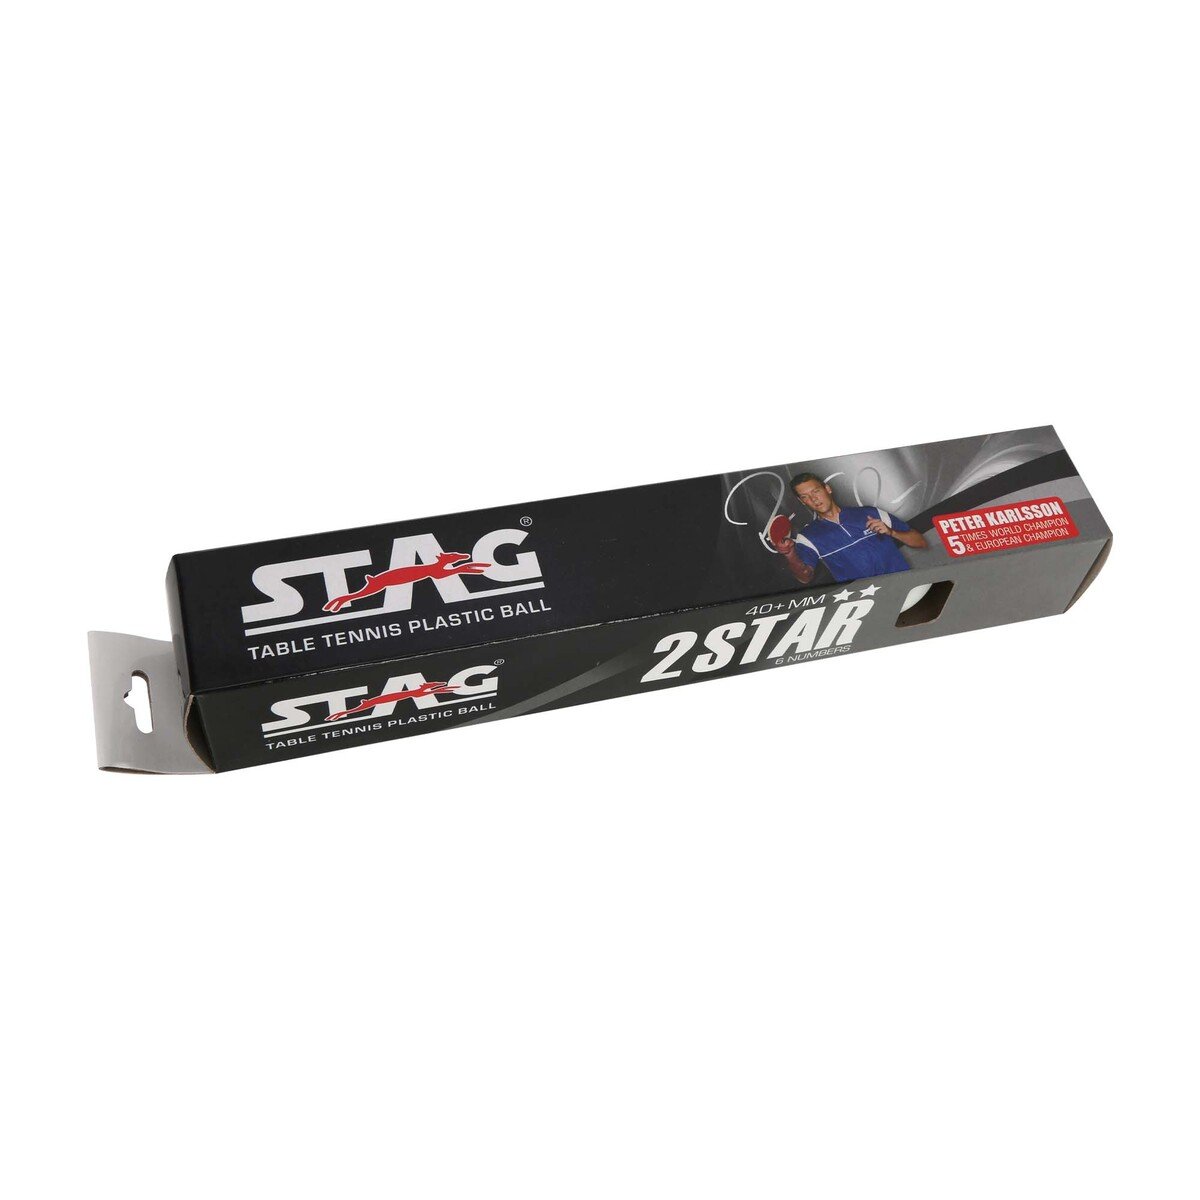 Stag Table Tennis Ball 2Star 6T TBAW-360D